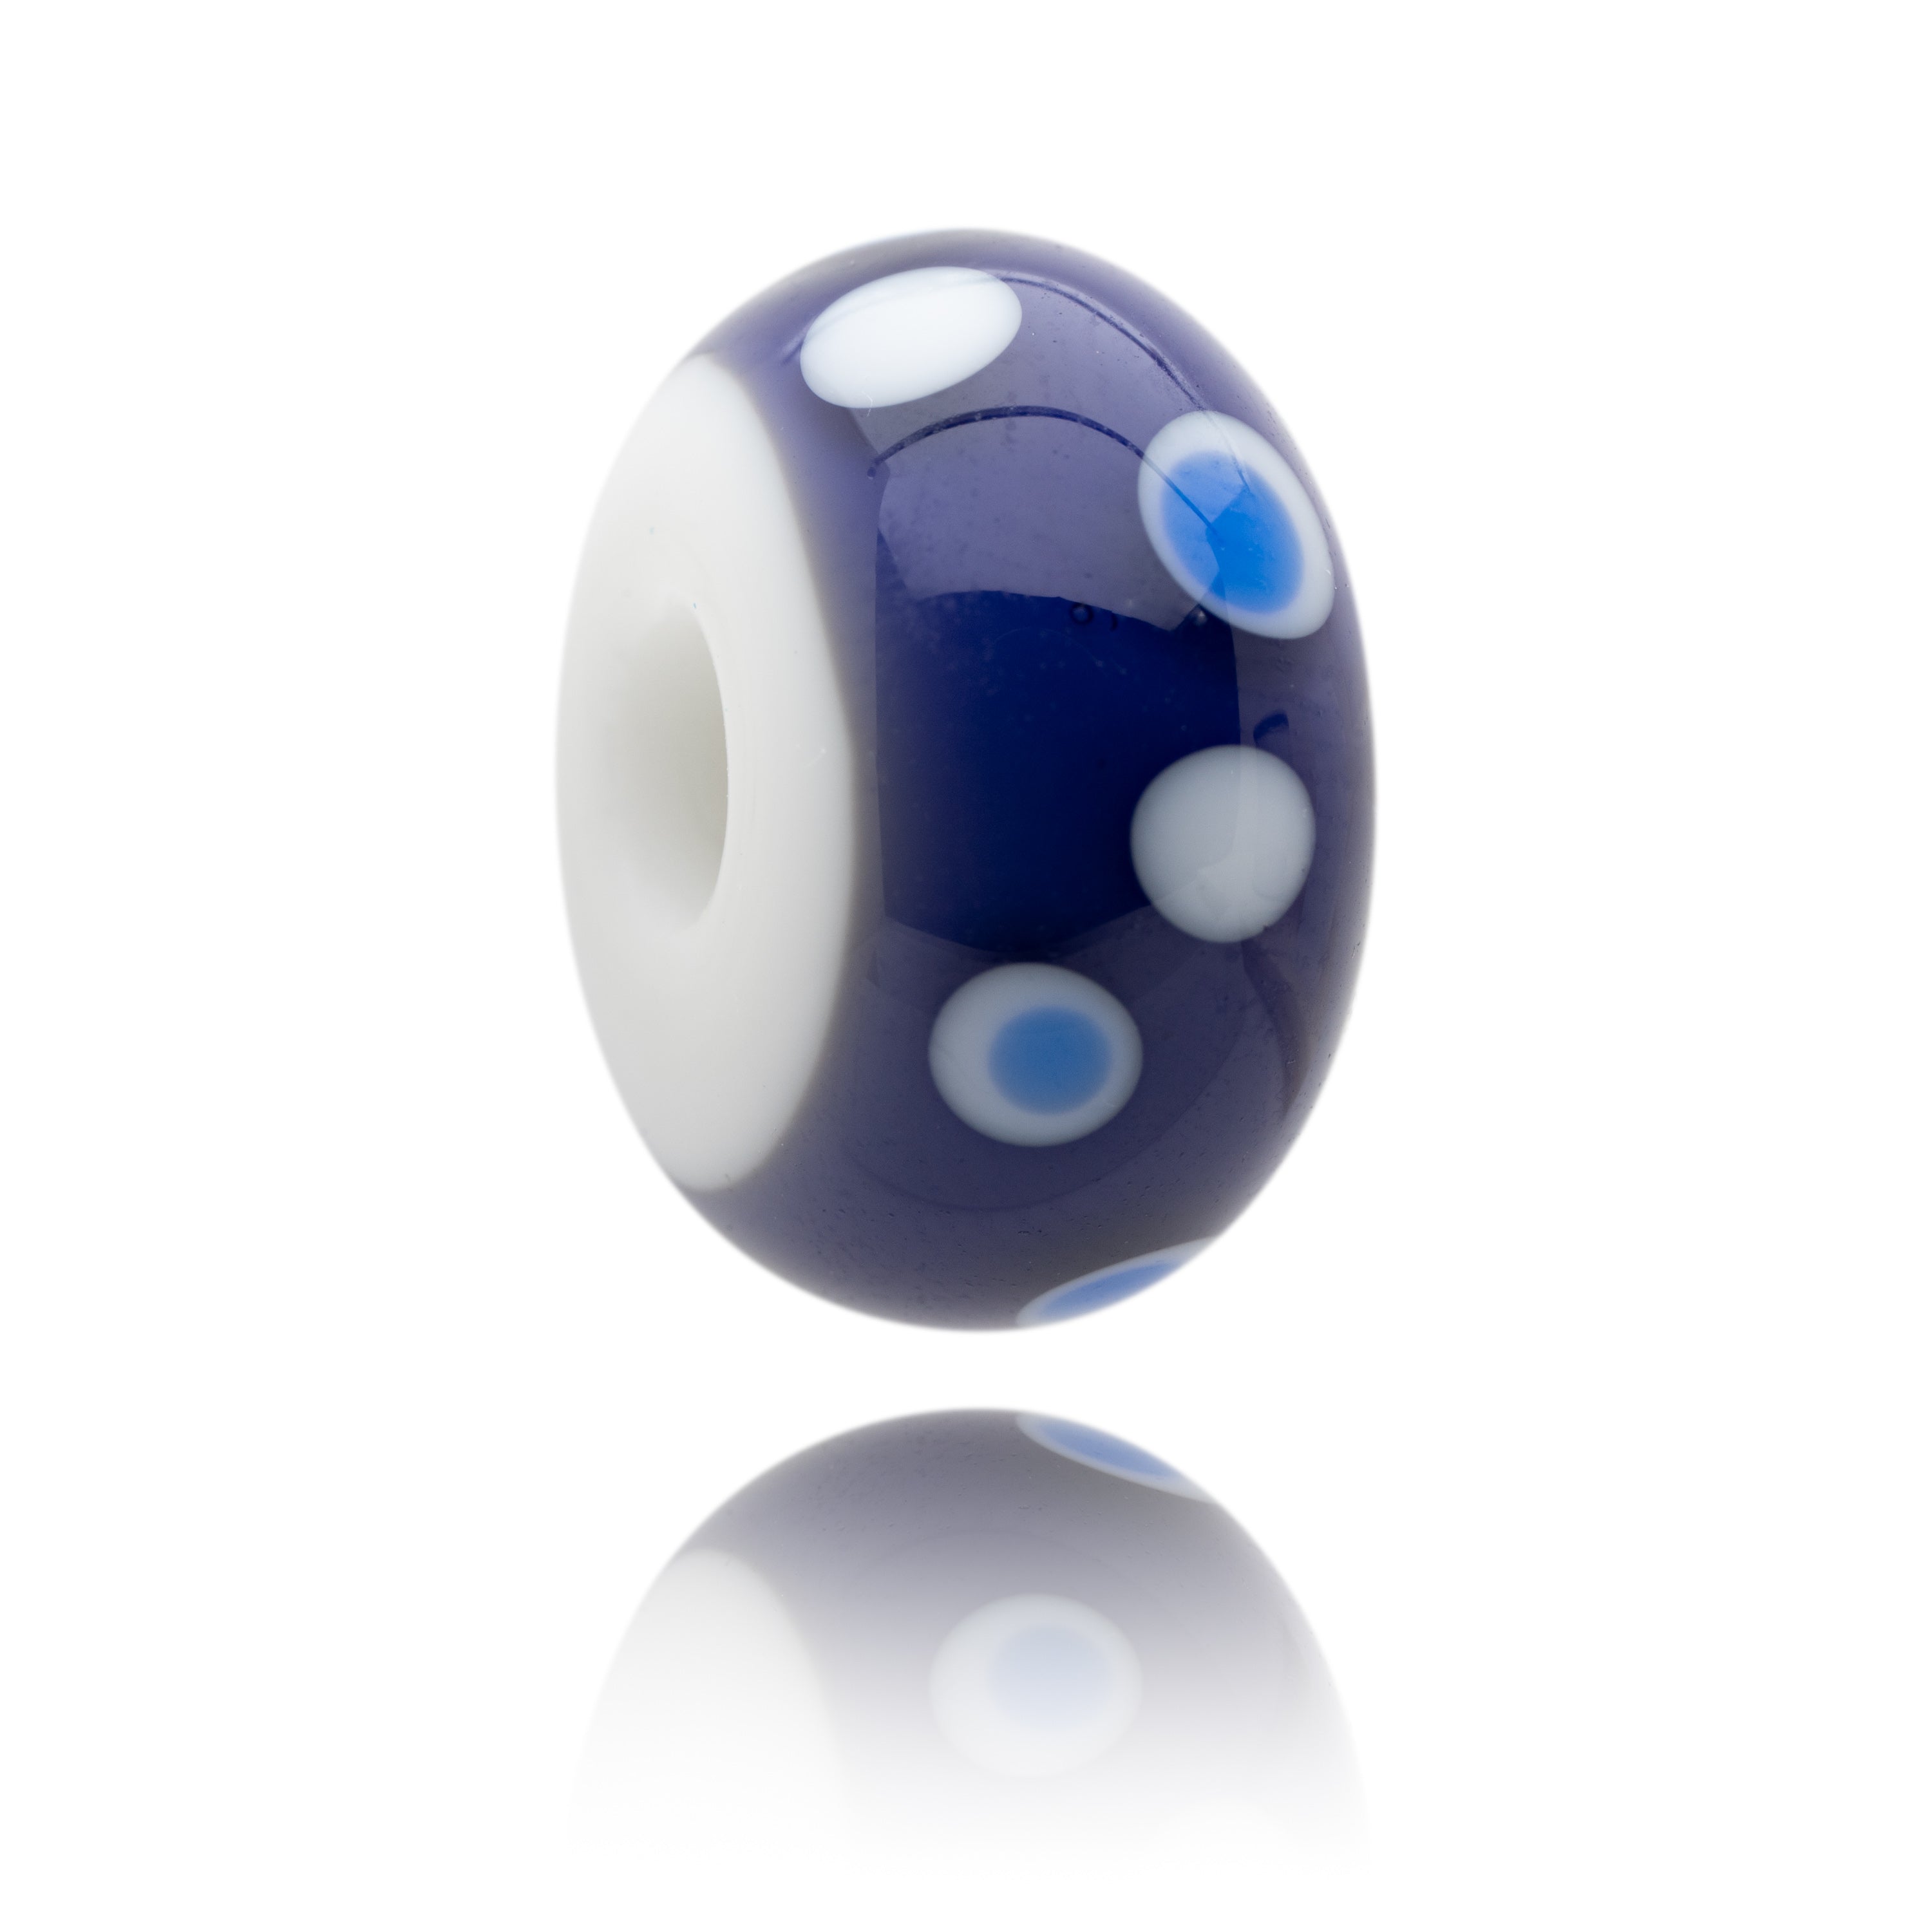 Purple and white glass beads with white and blue dots on surface, representing Calshot Hampshire.